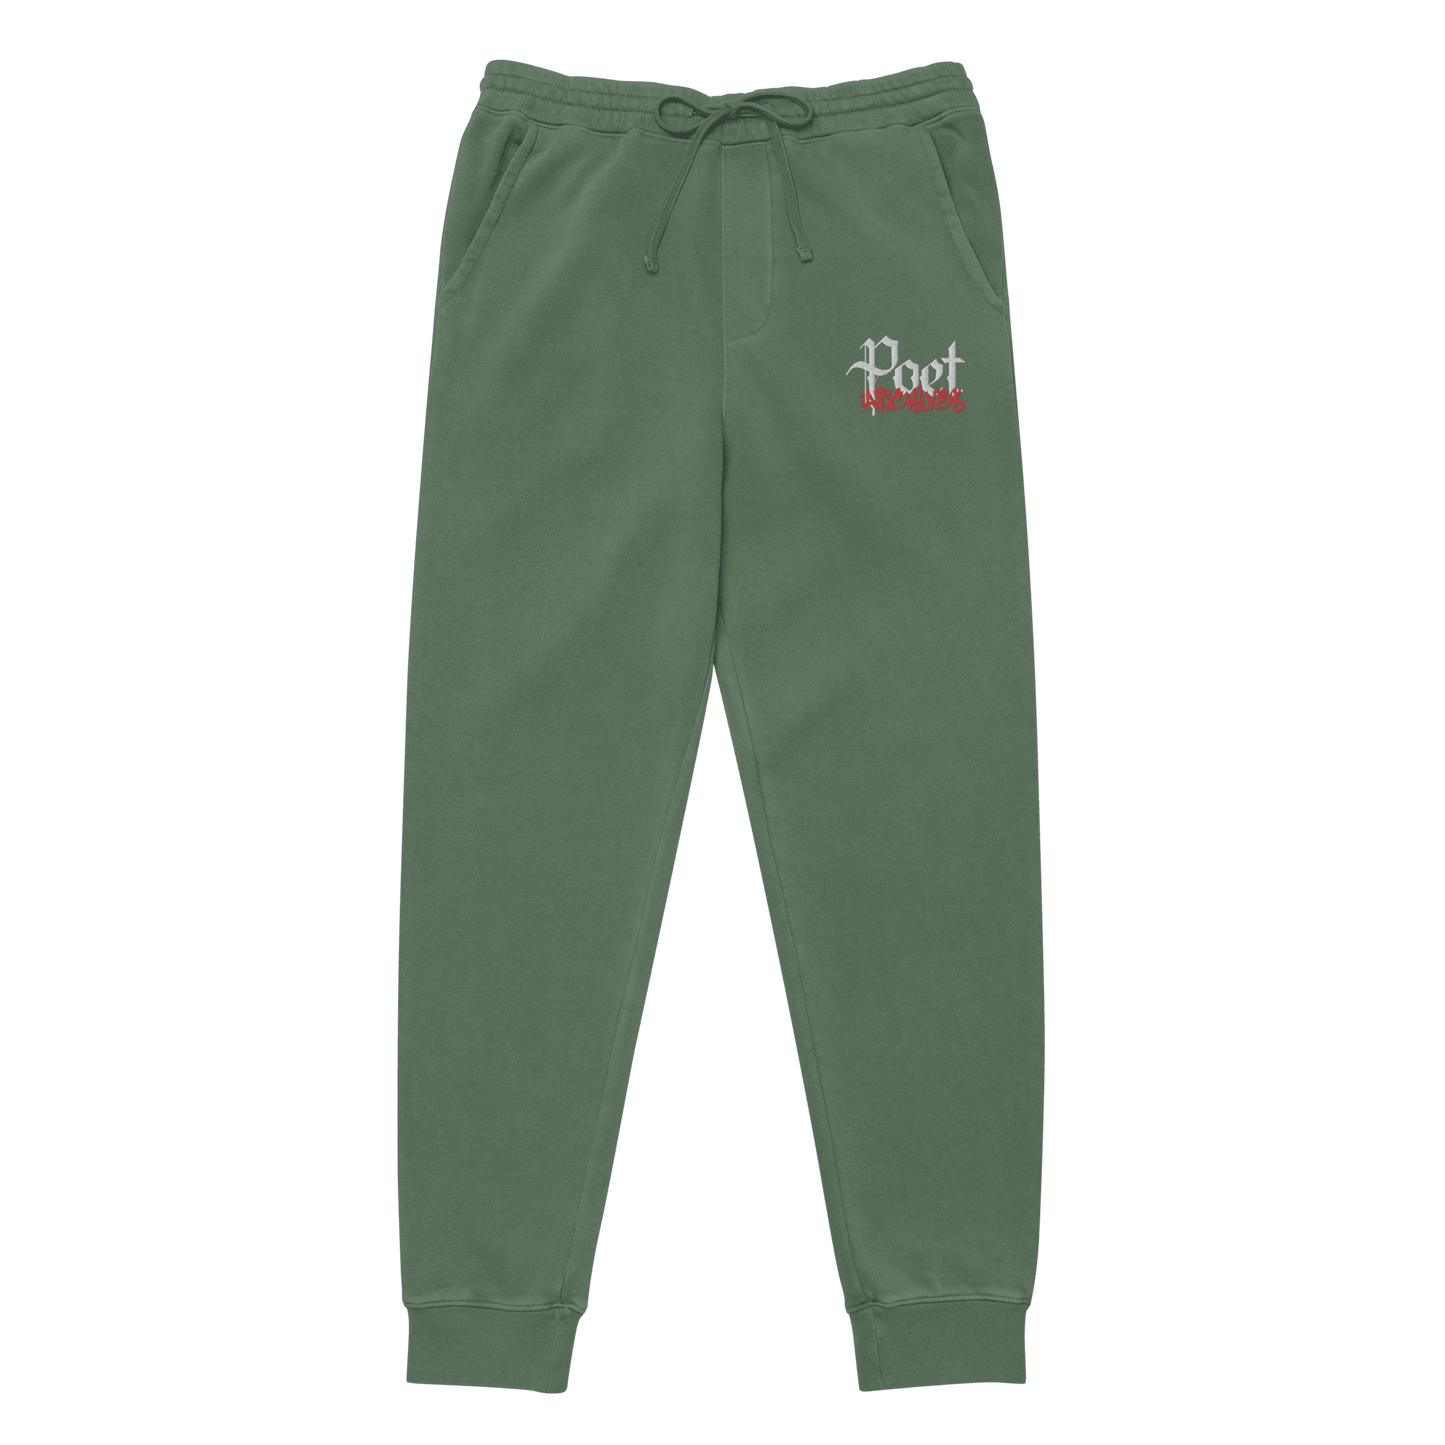 Poet Archives embroidered joggers - Poet Archives